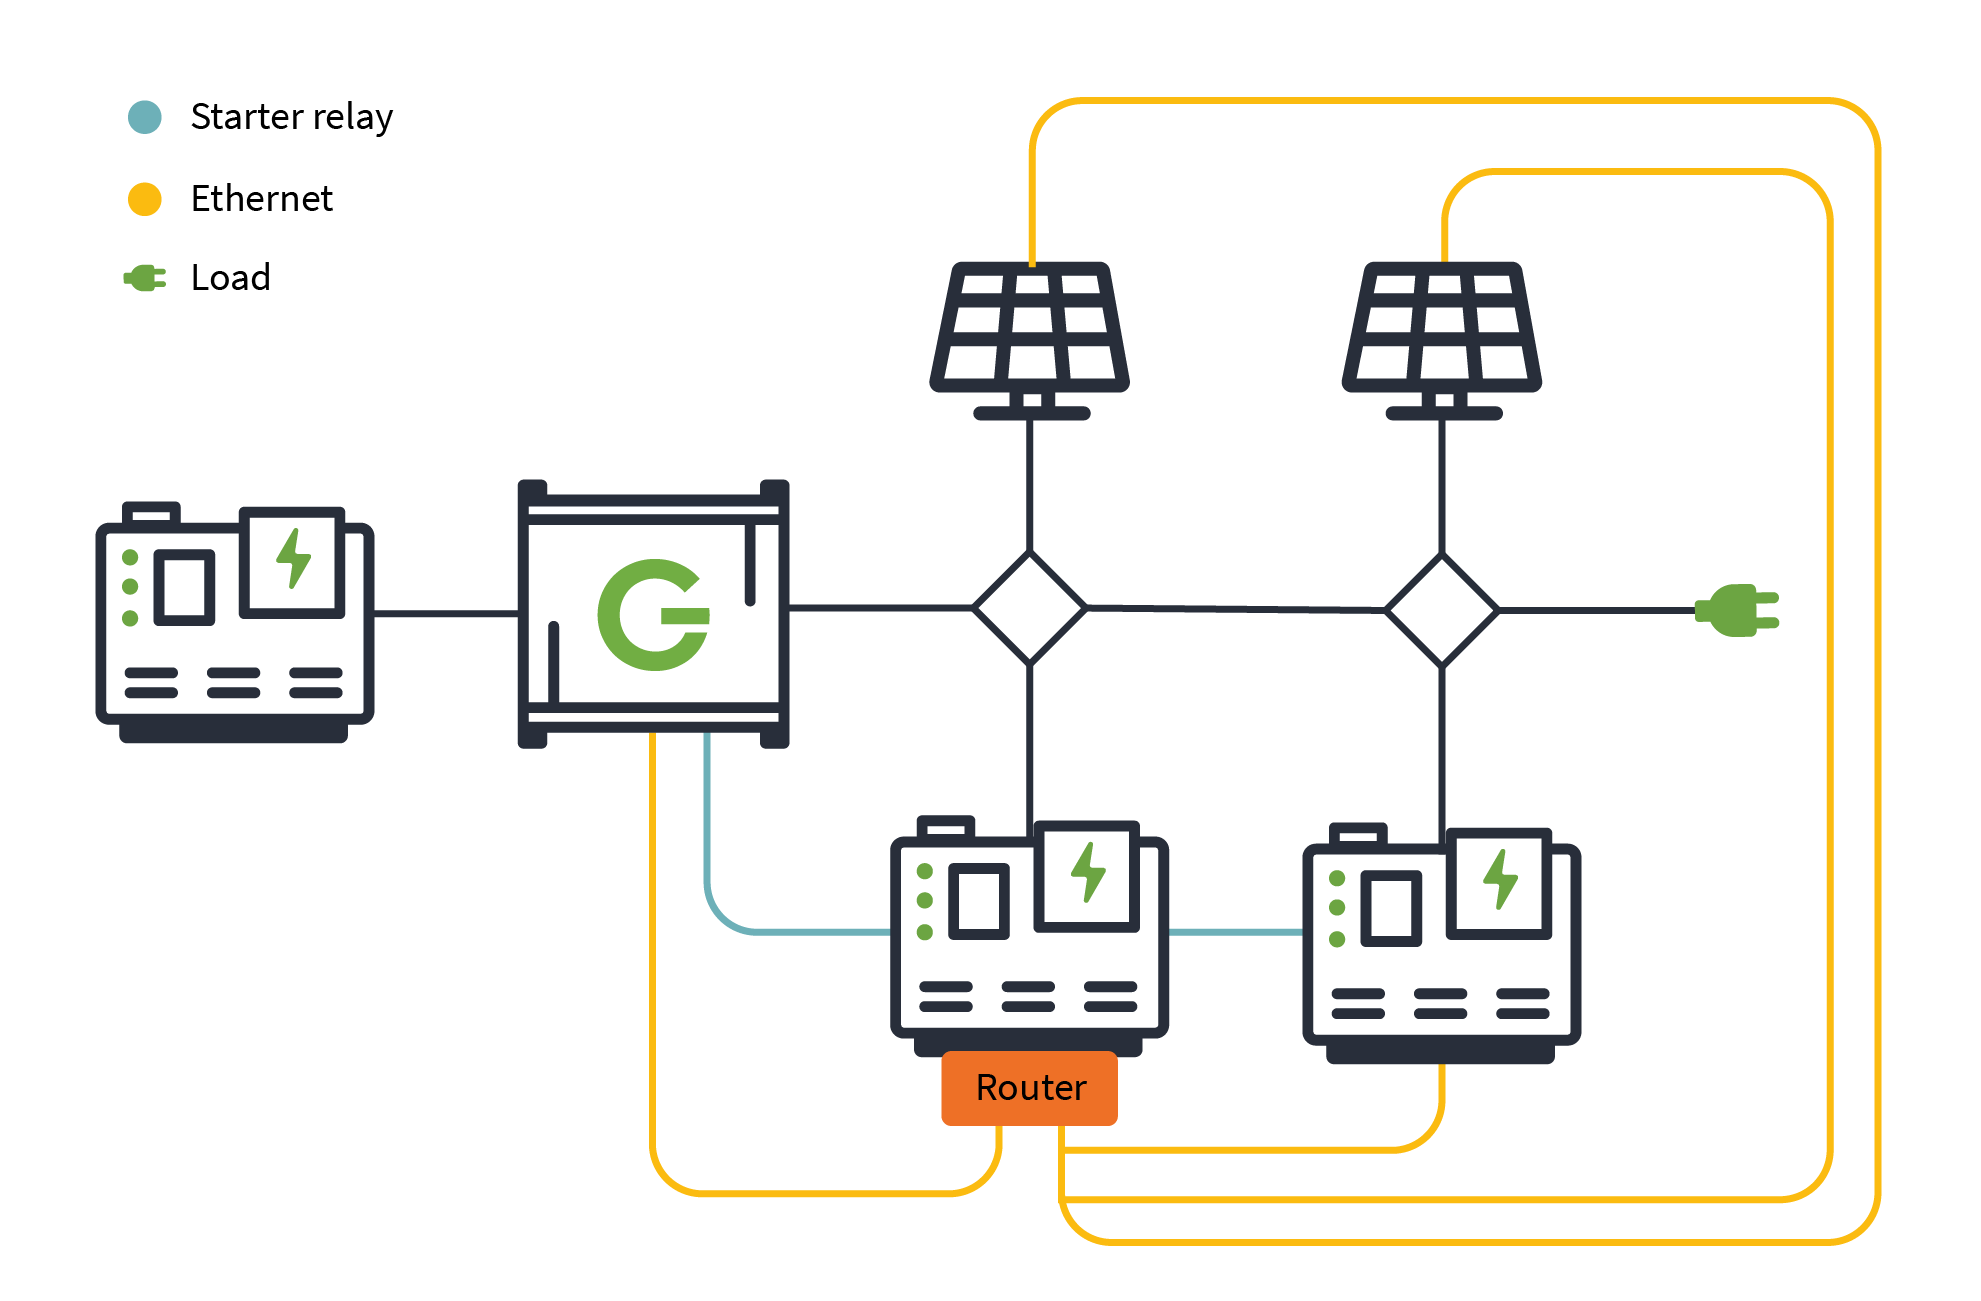 Complex set-up with multiple gensets and solar inverters